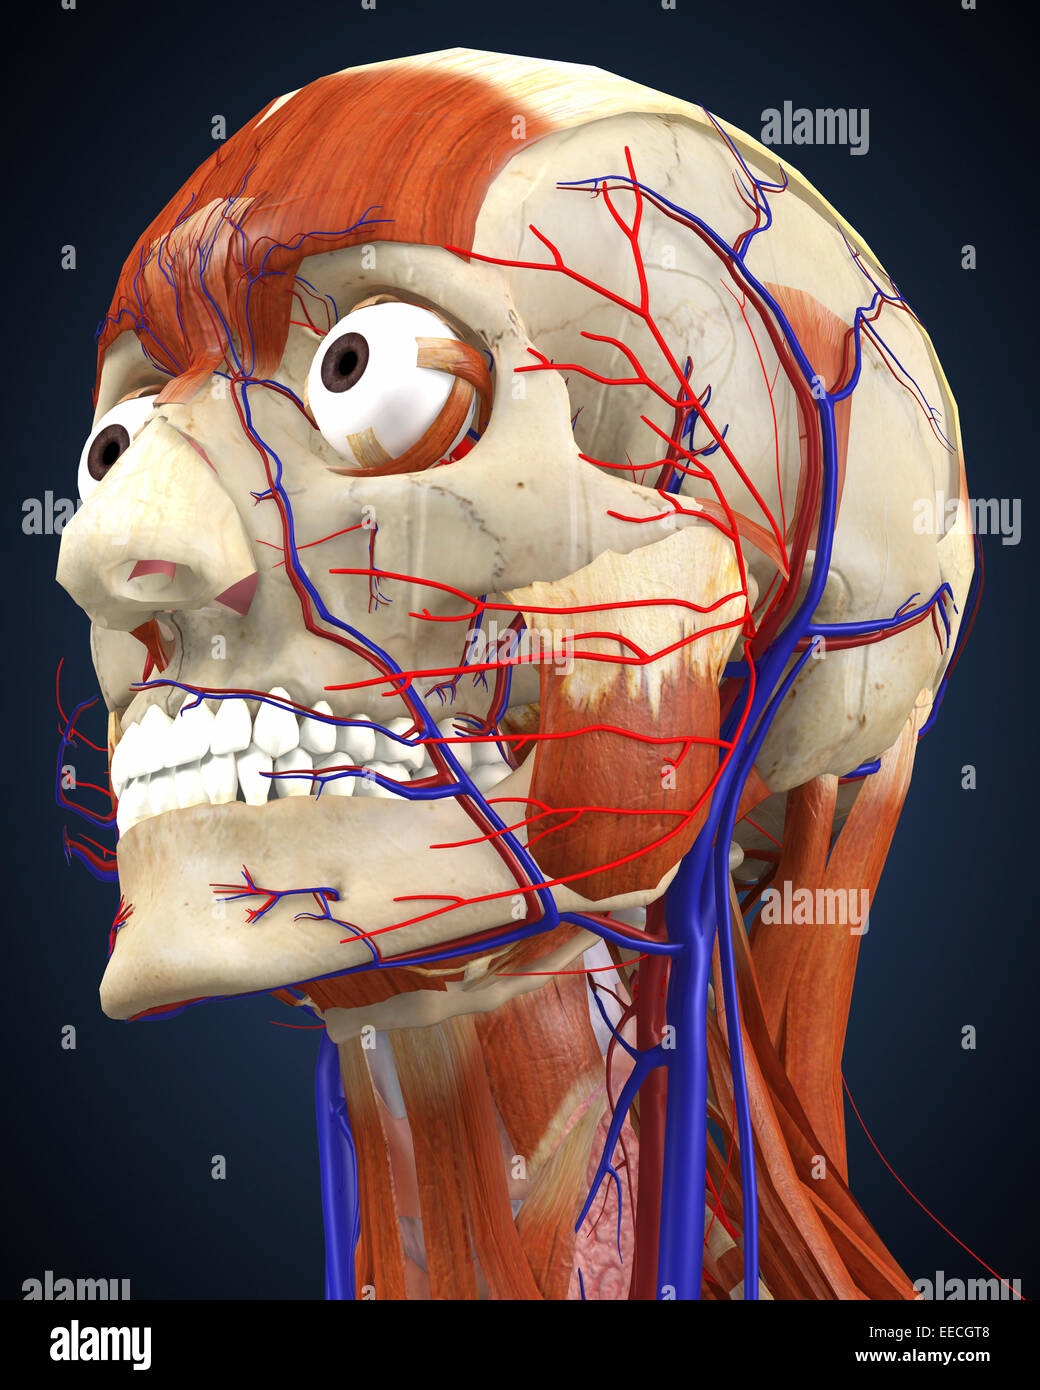 Human head with bone, muscles and circulatory system. Stock Photo